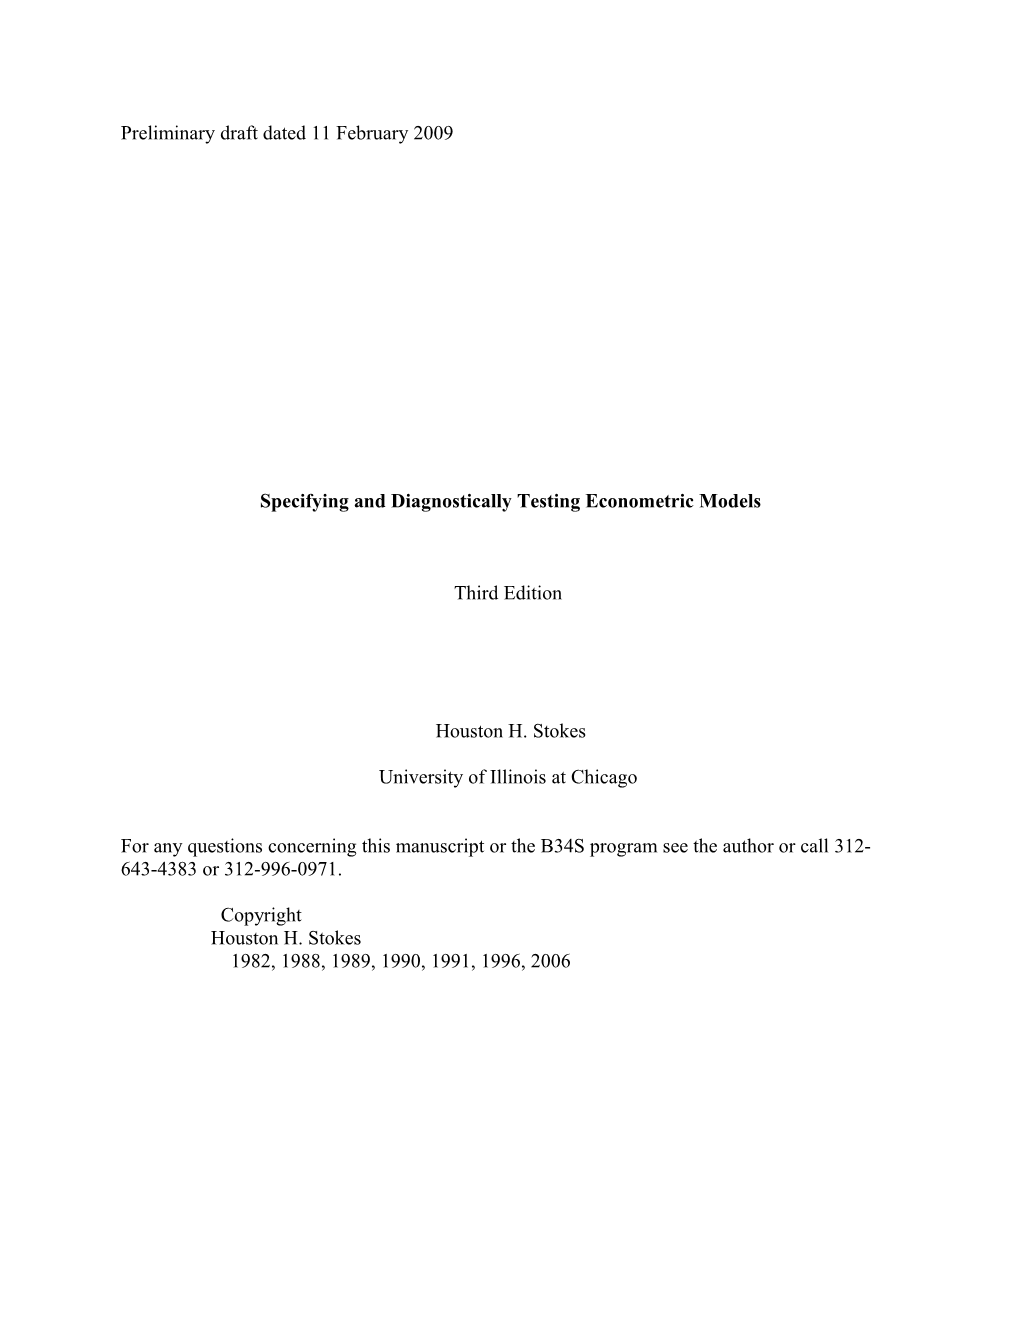 Specifying and Diagnostically Testing Econometric Models